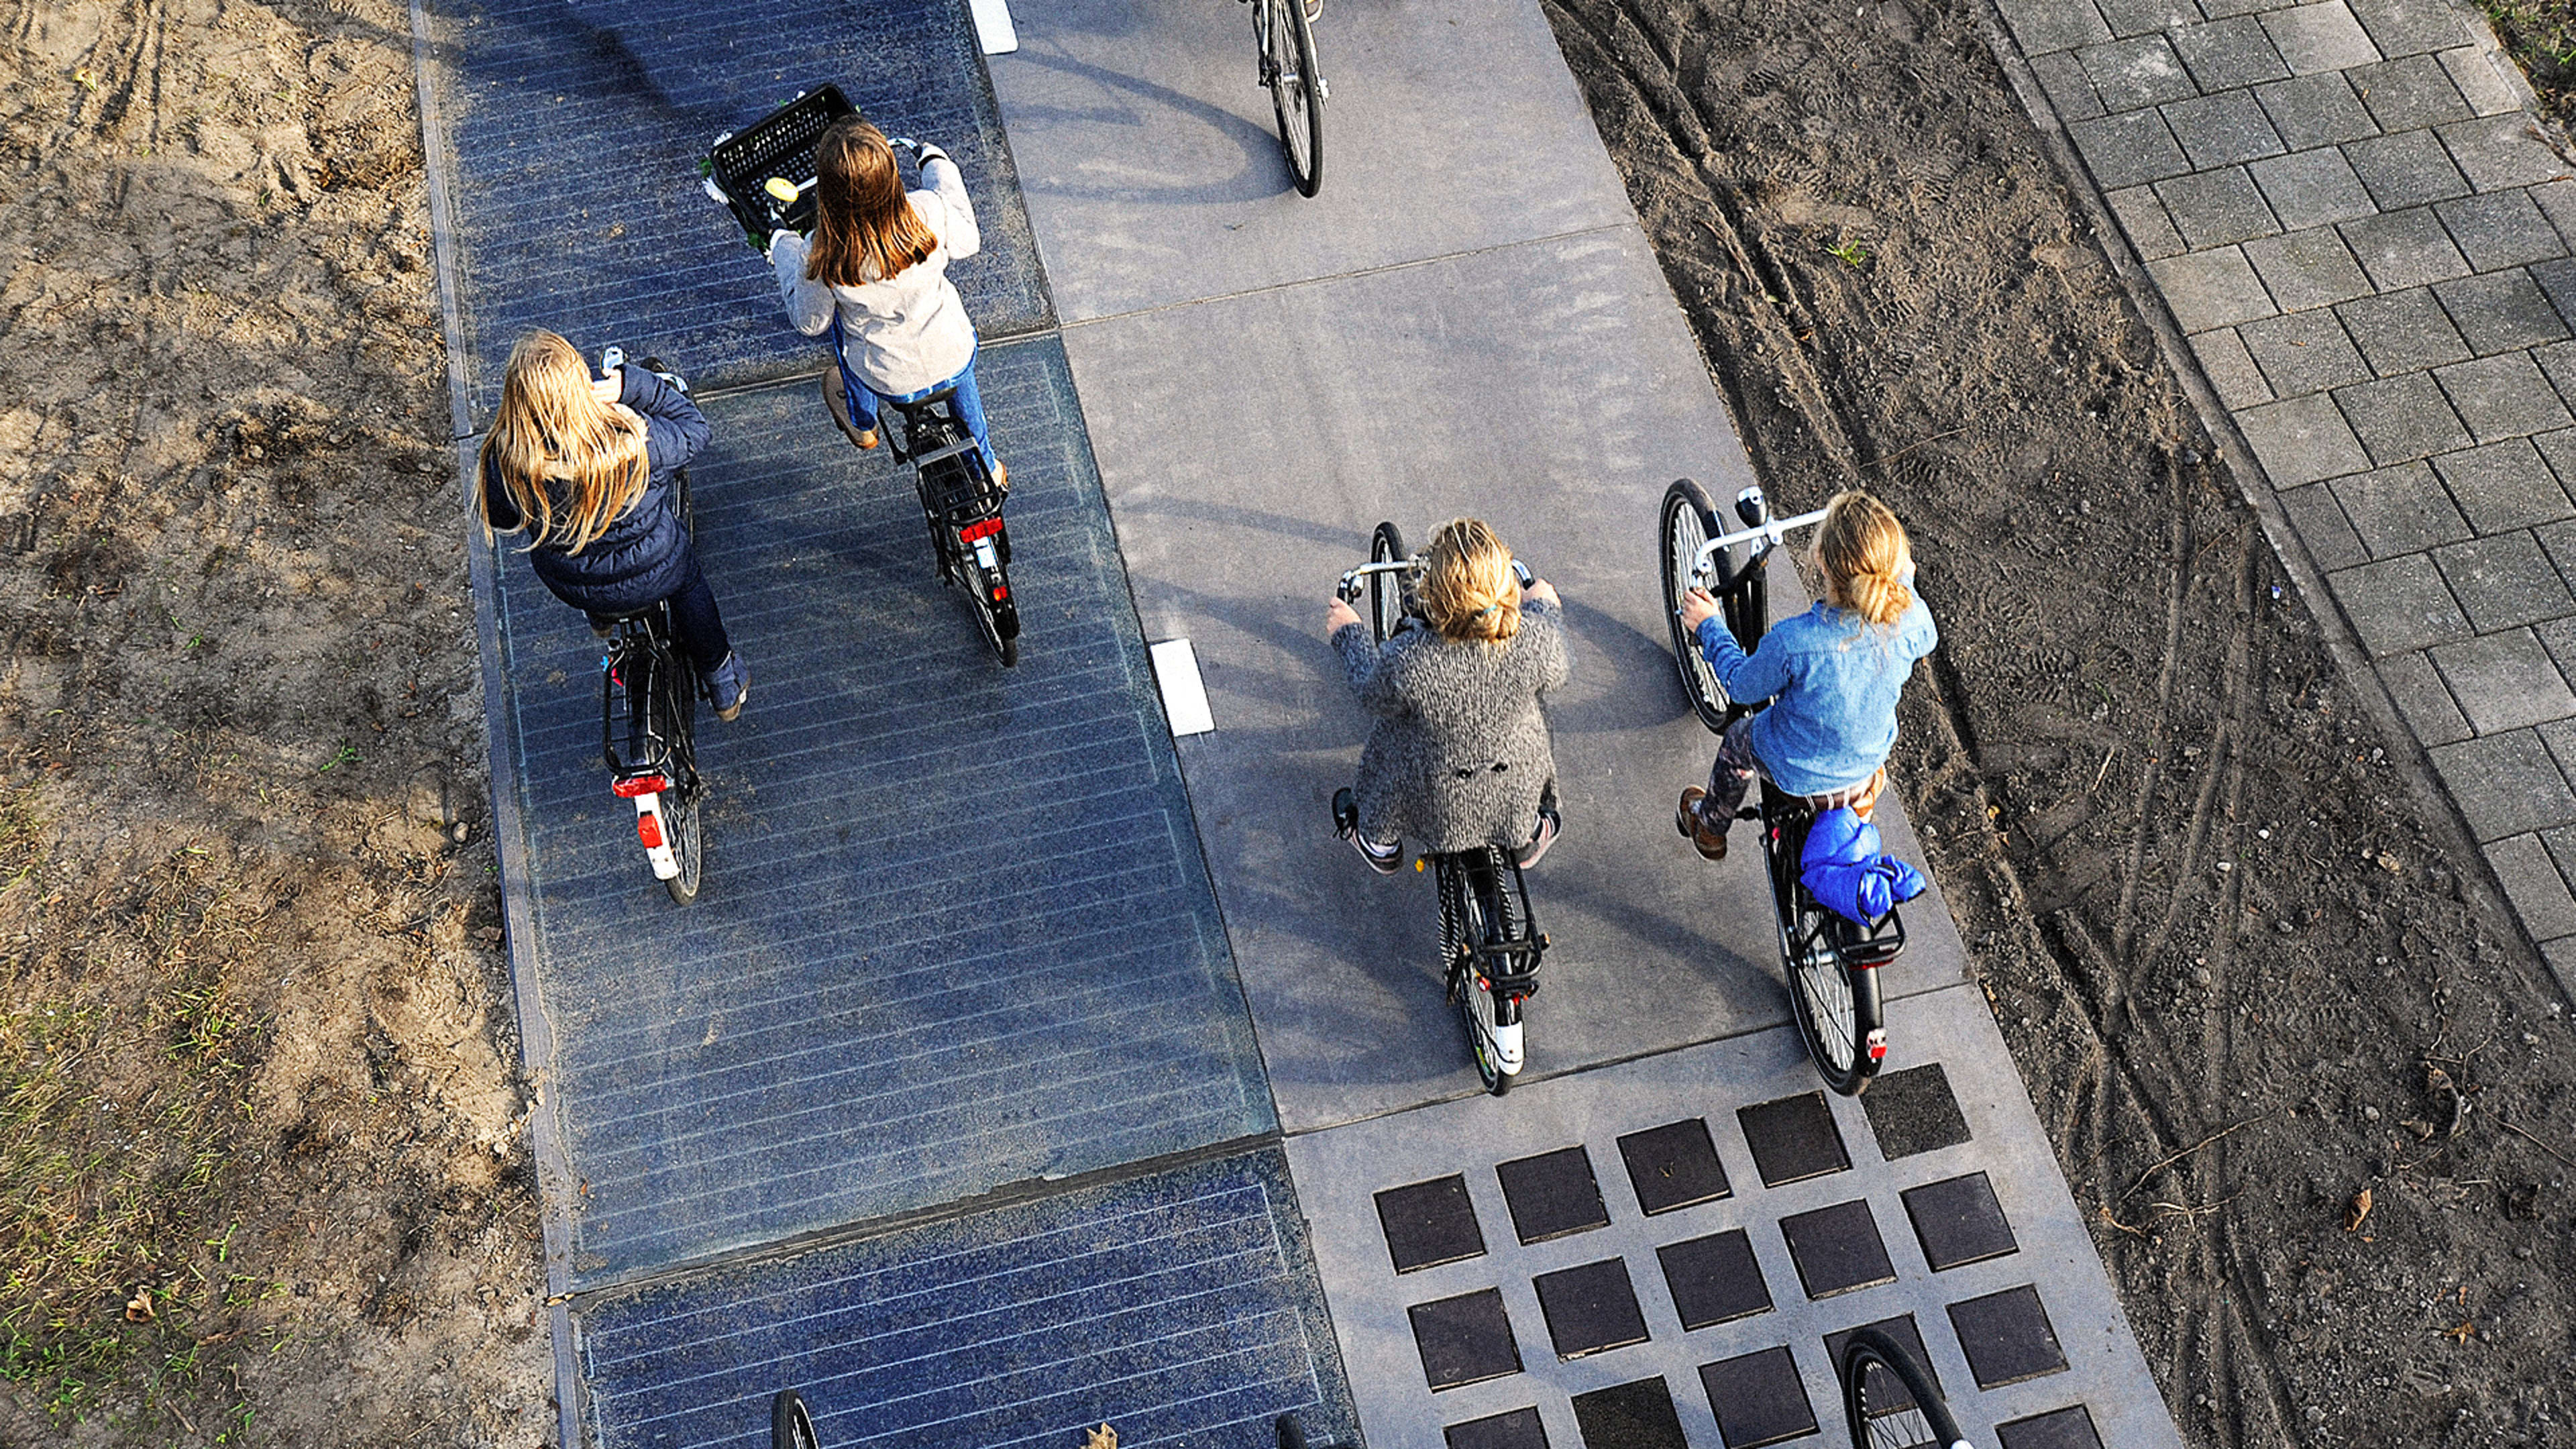 This Bike Path Paved With Solar Panels Shows That All Streets Could Double As Power Sources